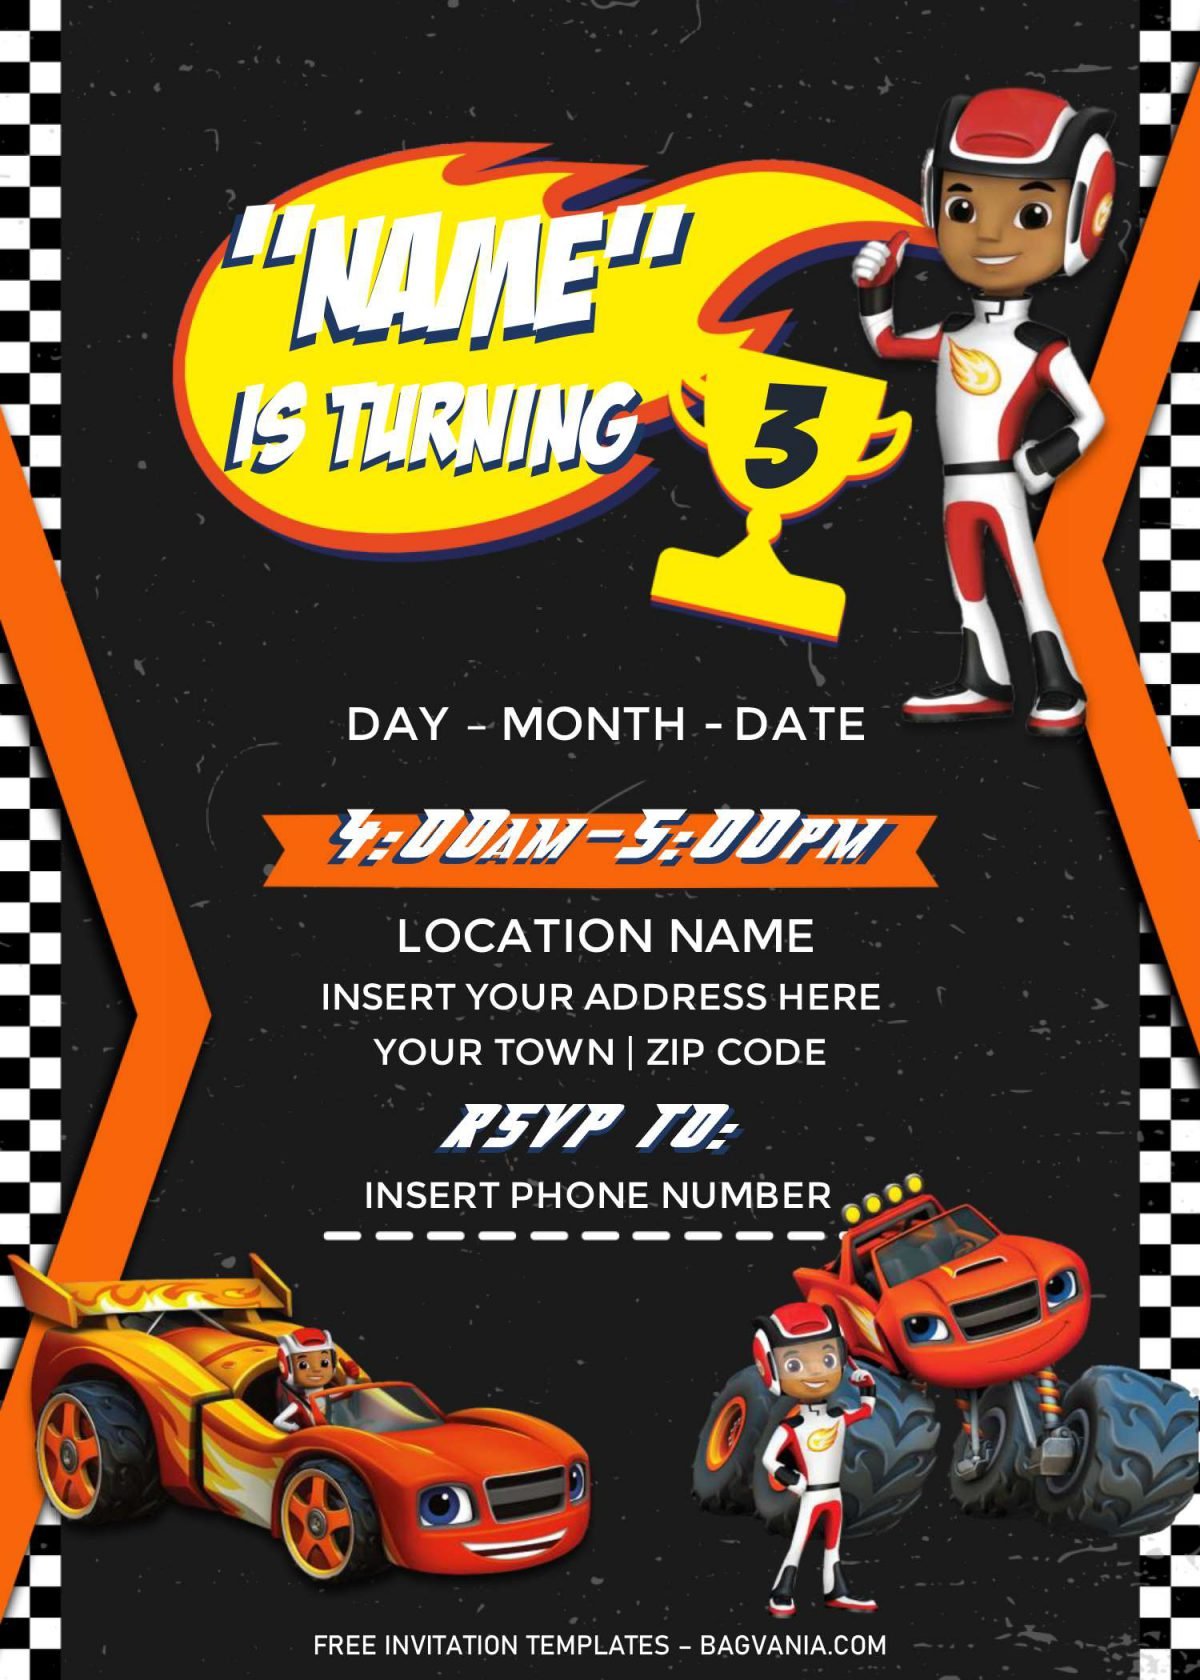 Free Blaze And The Monster Machines Birthday Invitation Templates For Word and has portrait orientation card design